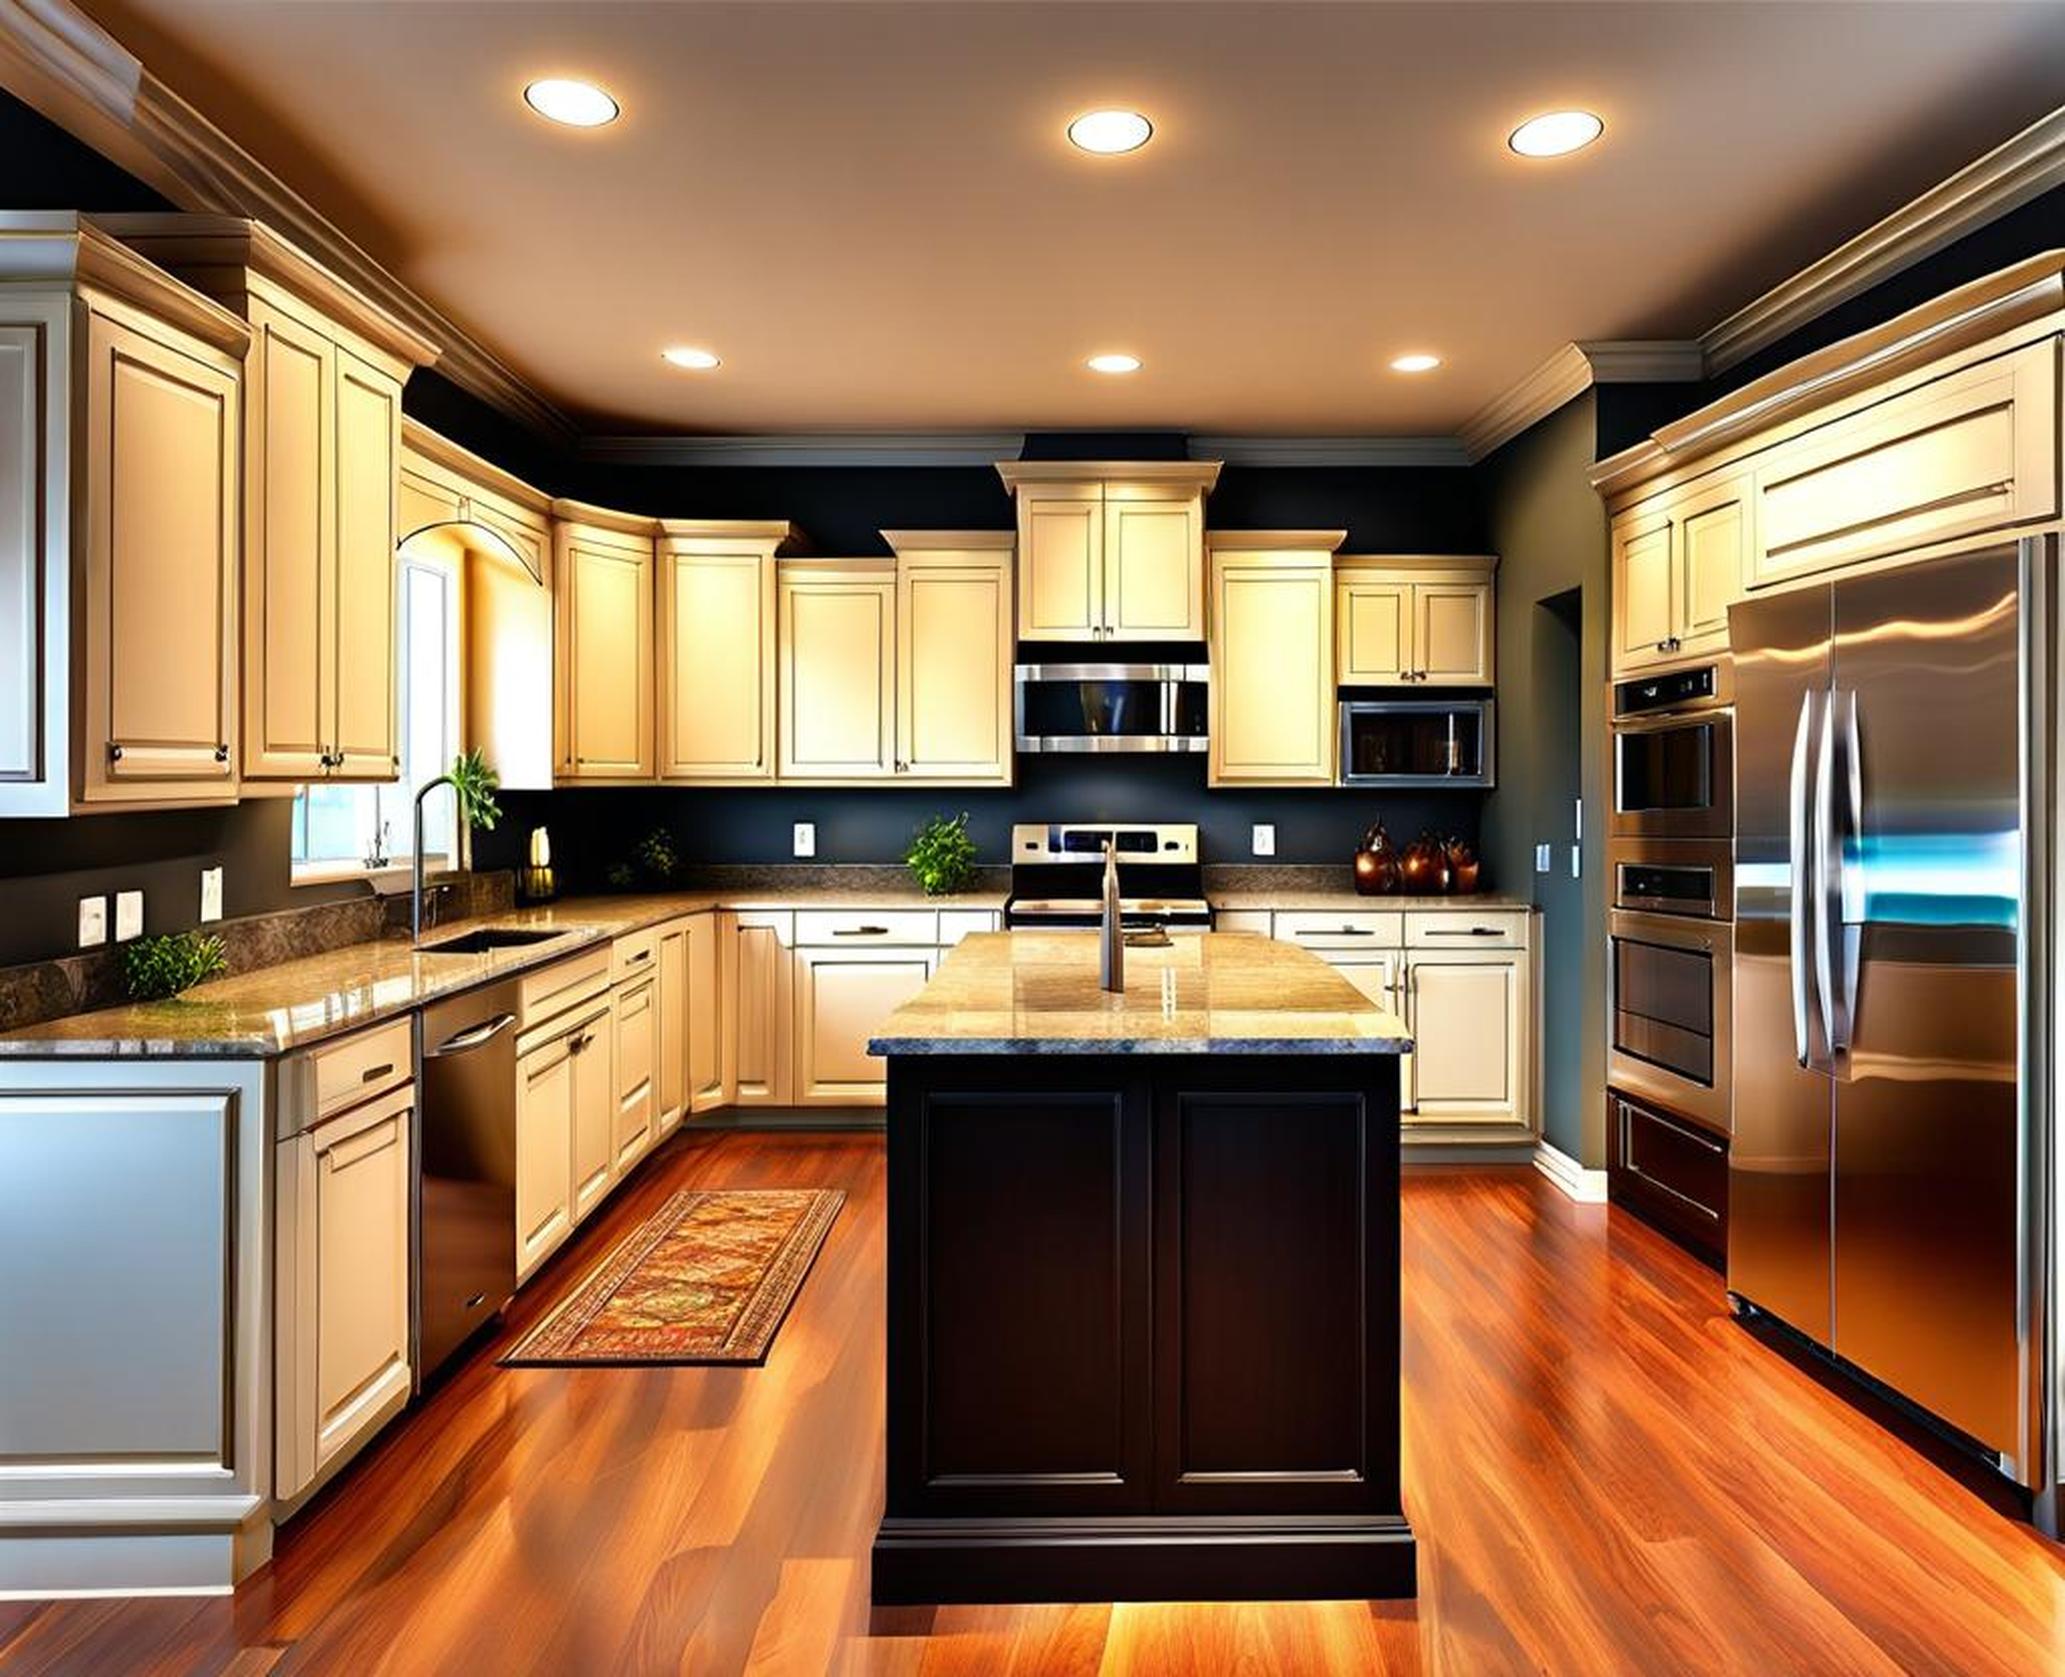 kitchen can light layout